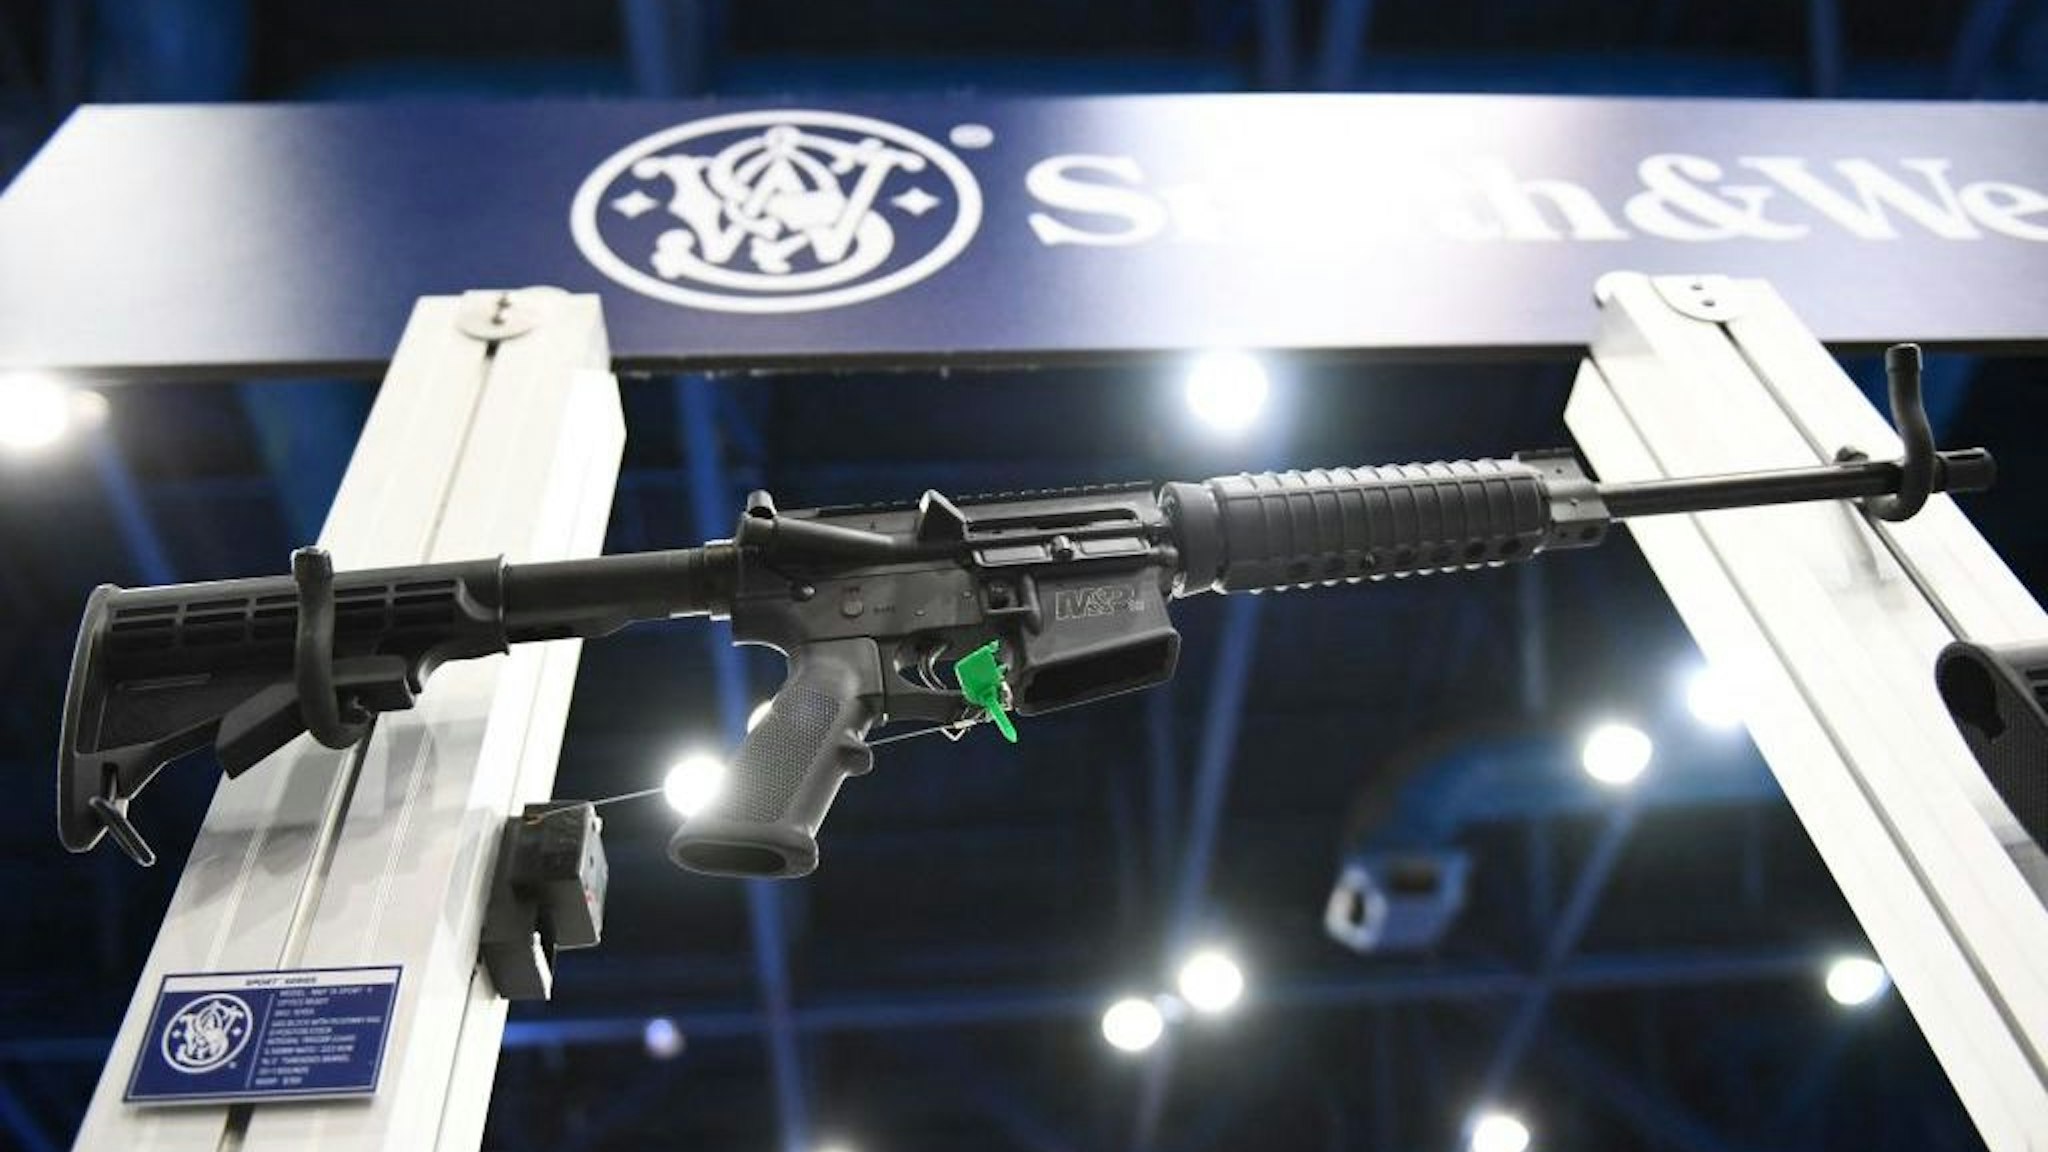 Smith & Wesson M&P-15 semi-automatic rifles of the AR-15 style are displayed during the National Rifle Association (NRA) annual meeting at the George R. Brown Convention Center, in Houston, Texas on May 28, 2022. - America's powerful National Rifle Association kicked off a major convention in Houston Friday, days after the horrific massacre of children at a Texas elementary school, but a string of high-profile no-shows underscored deep unease at the timing of the gun lobby event. (Photo by Patrick T. FALLON / AFP) (Photo by PATRICK T. FALLON/AFP via Getty Images)